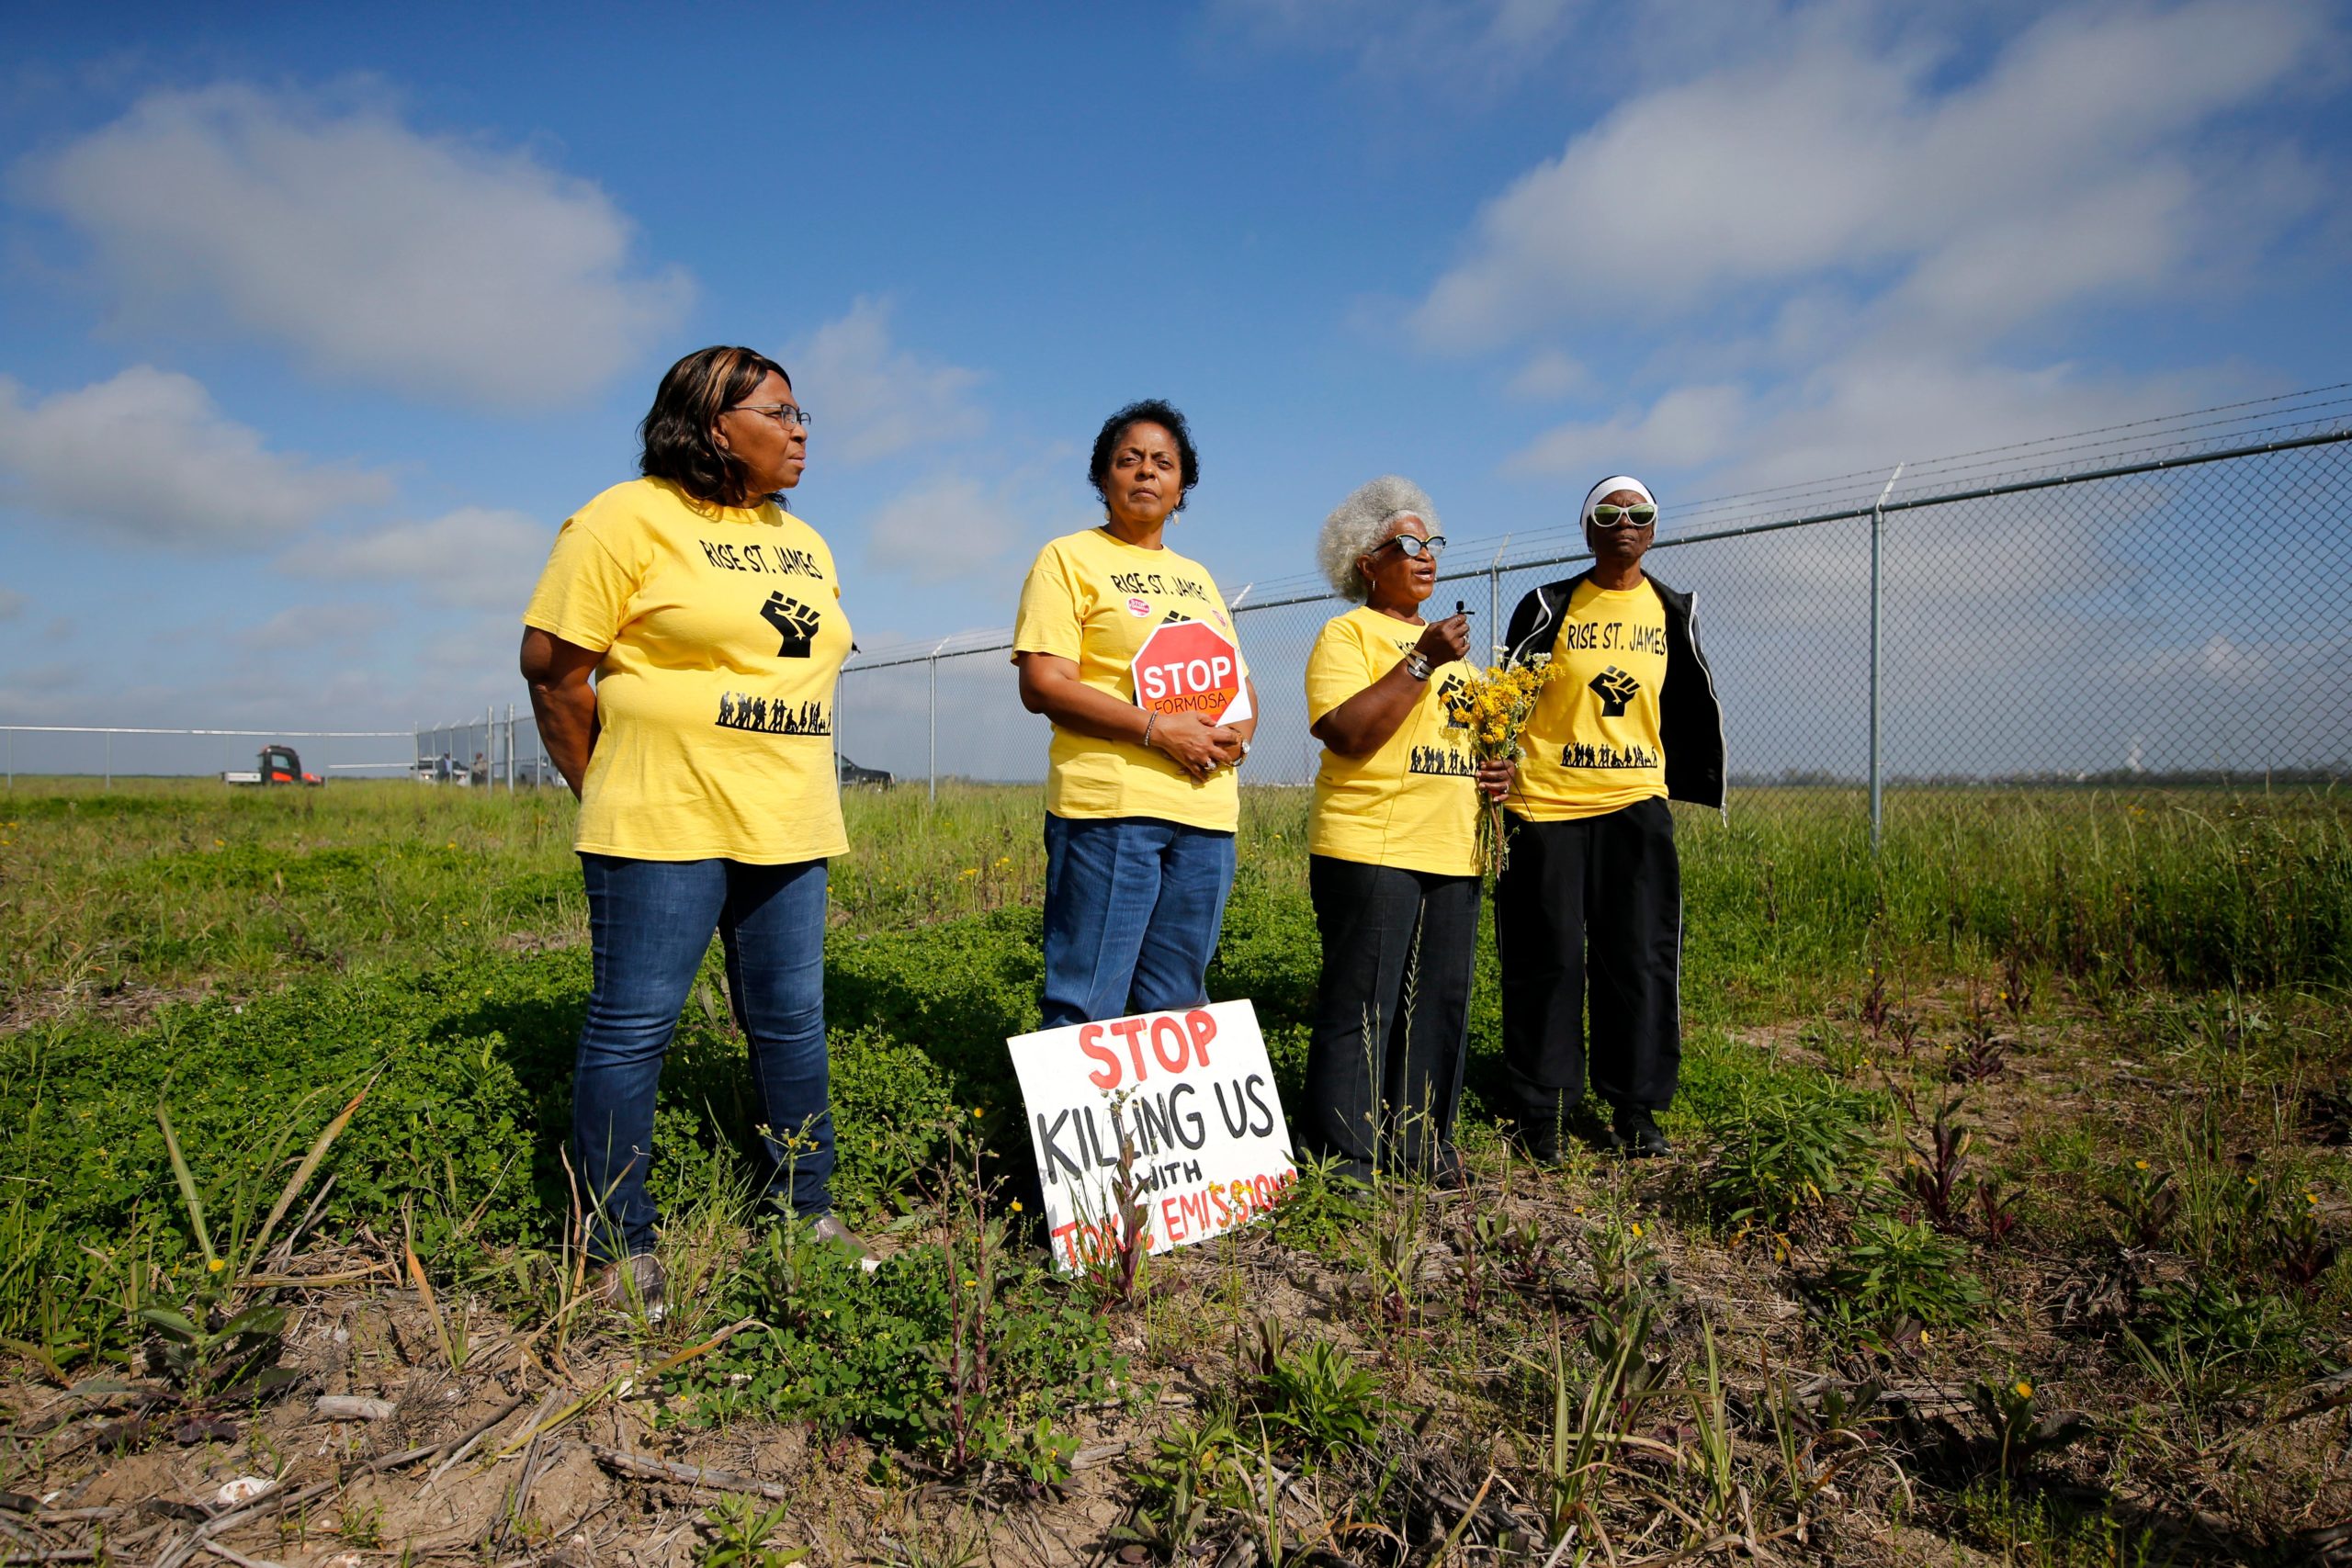 From left, Myrtle Felton, Sharon Lavigne, Gail LeBoeuf and Rita Cooper, members of RISE St. James, conduct a live stream video on property owned by Formosa in St. James Parish, Louisiana on Wednesday, March 11, 2020. (Photo: Gerald Herbert, AP)